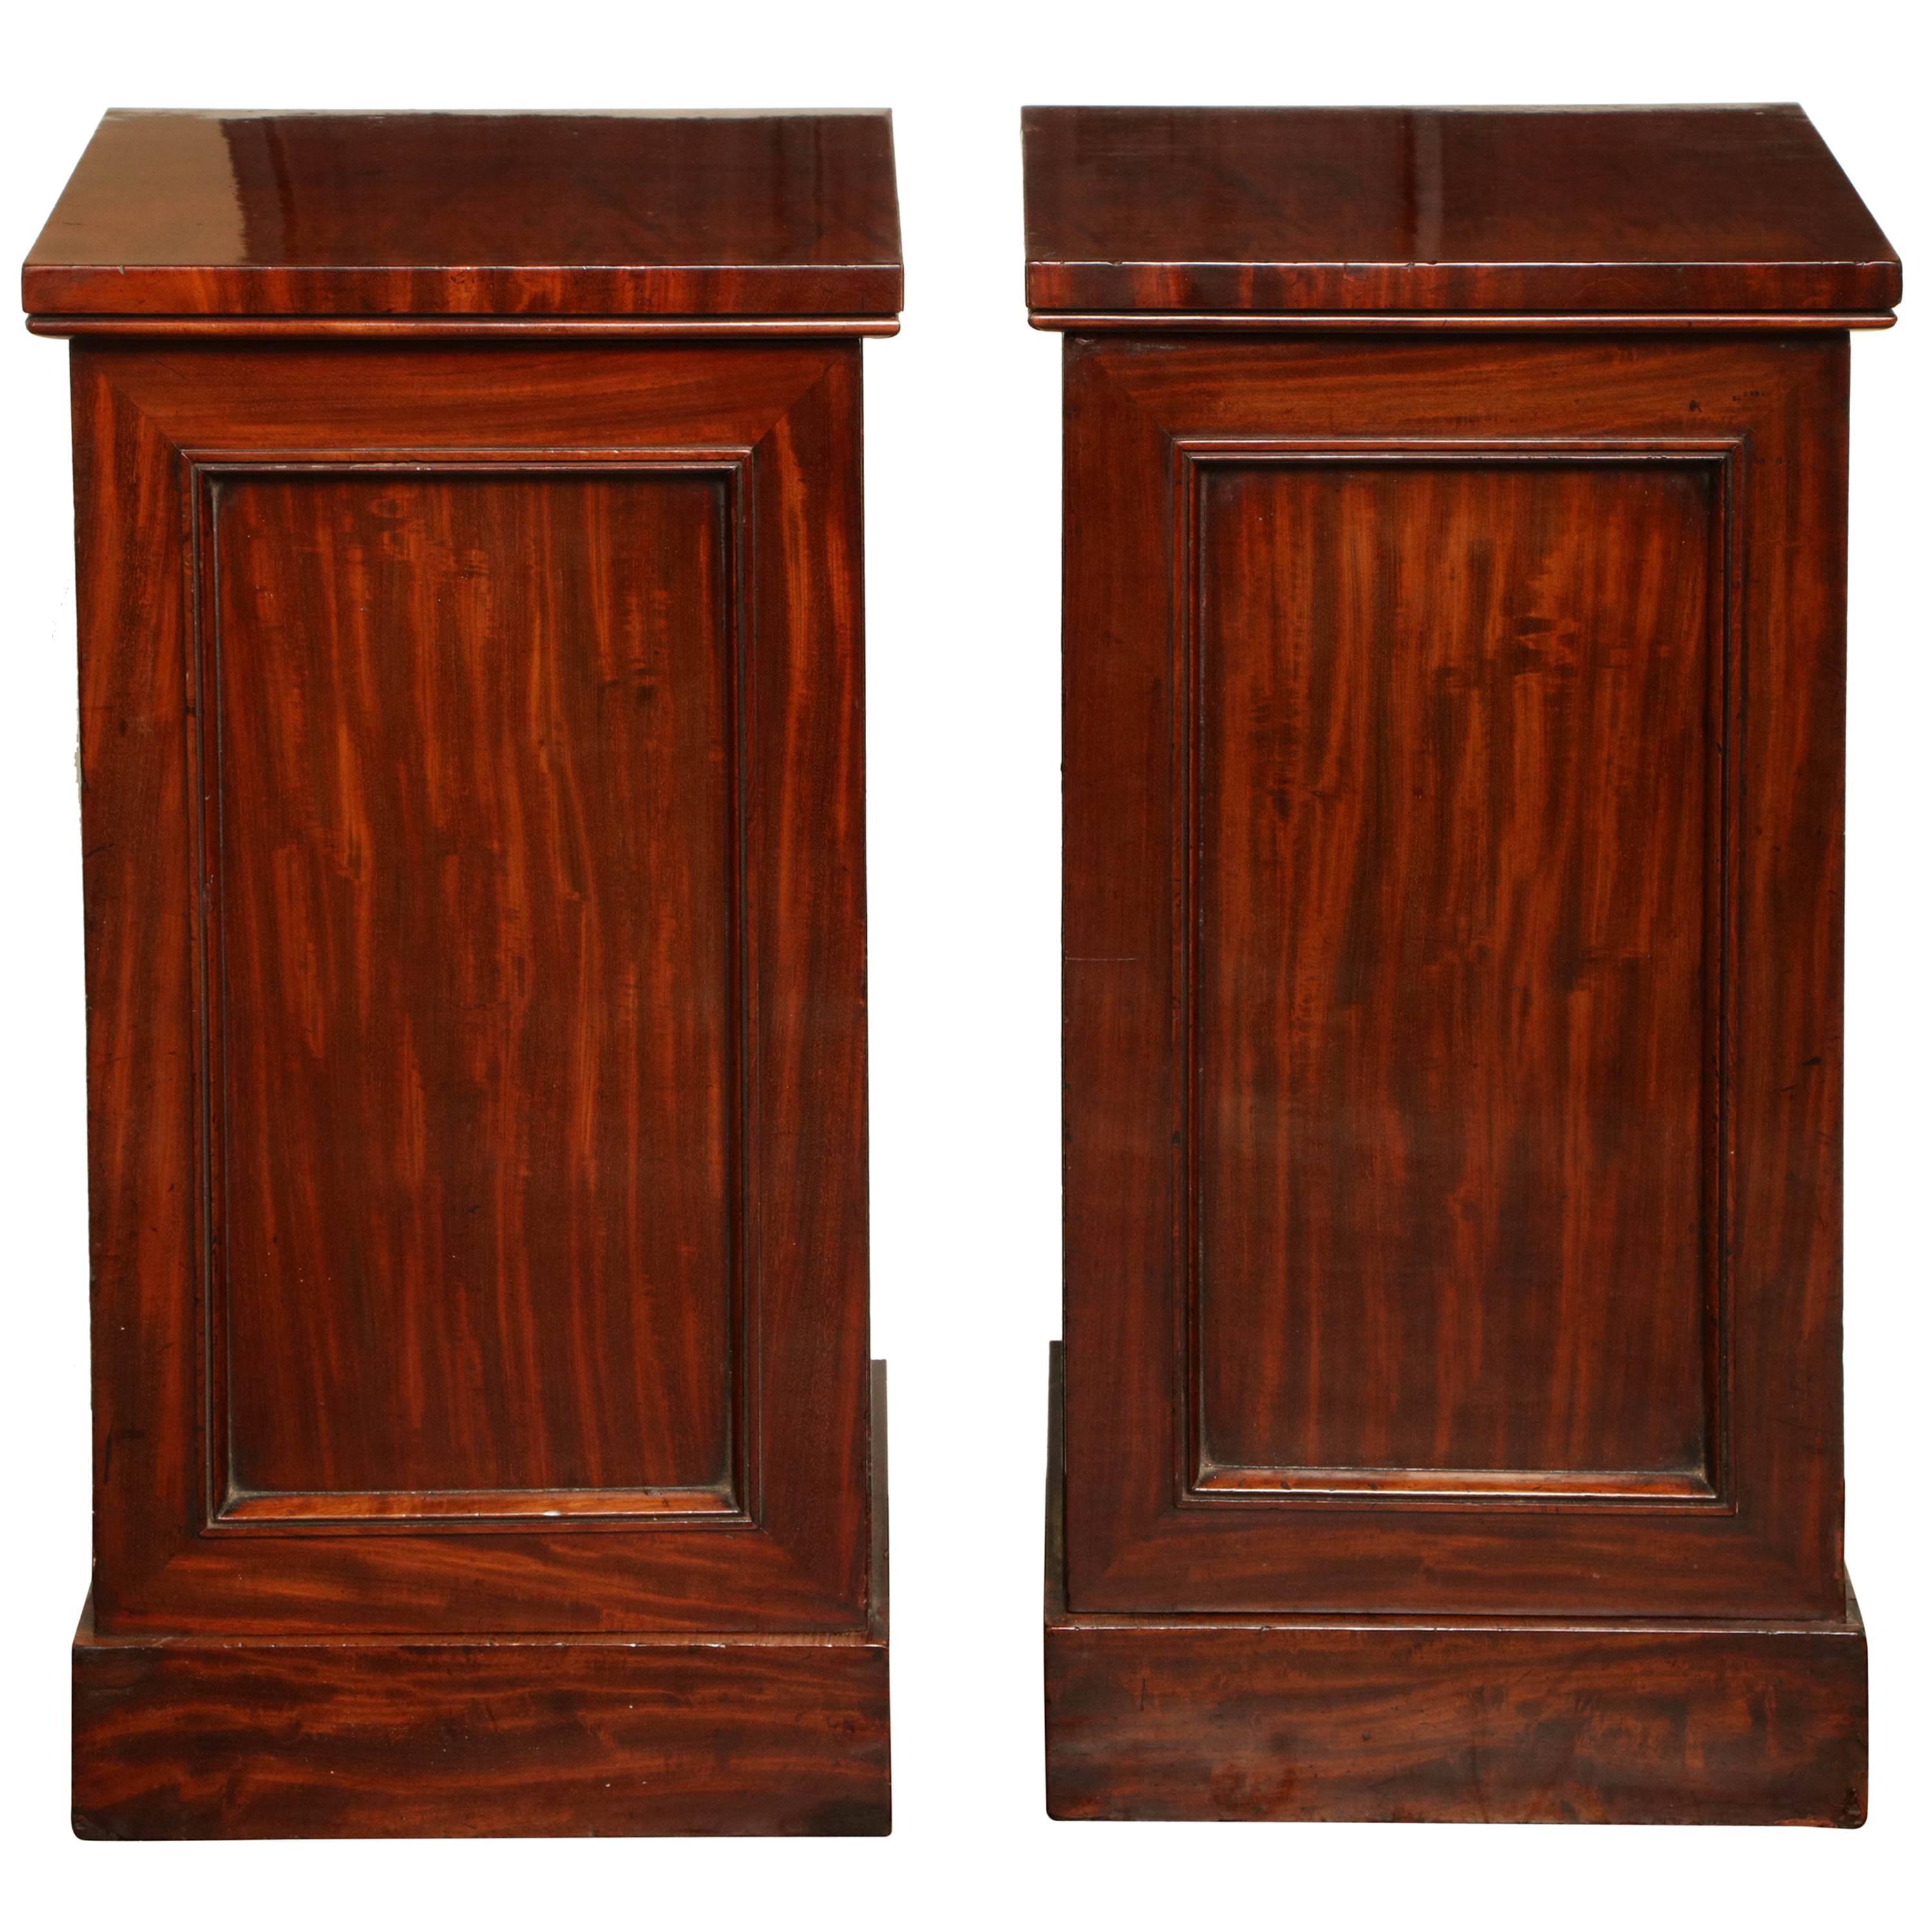 Pair of Late 19th Century English Bedside Tables